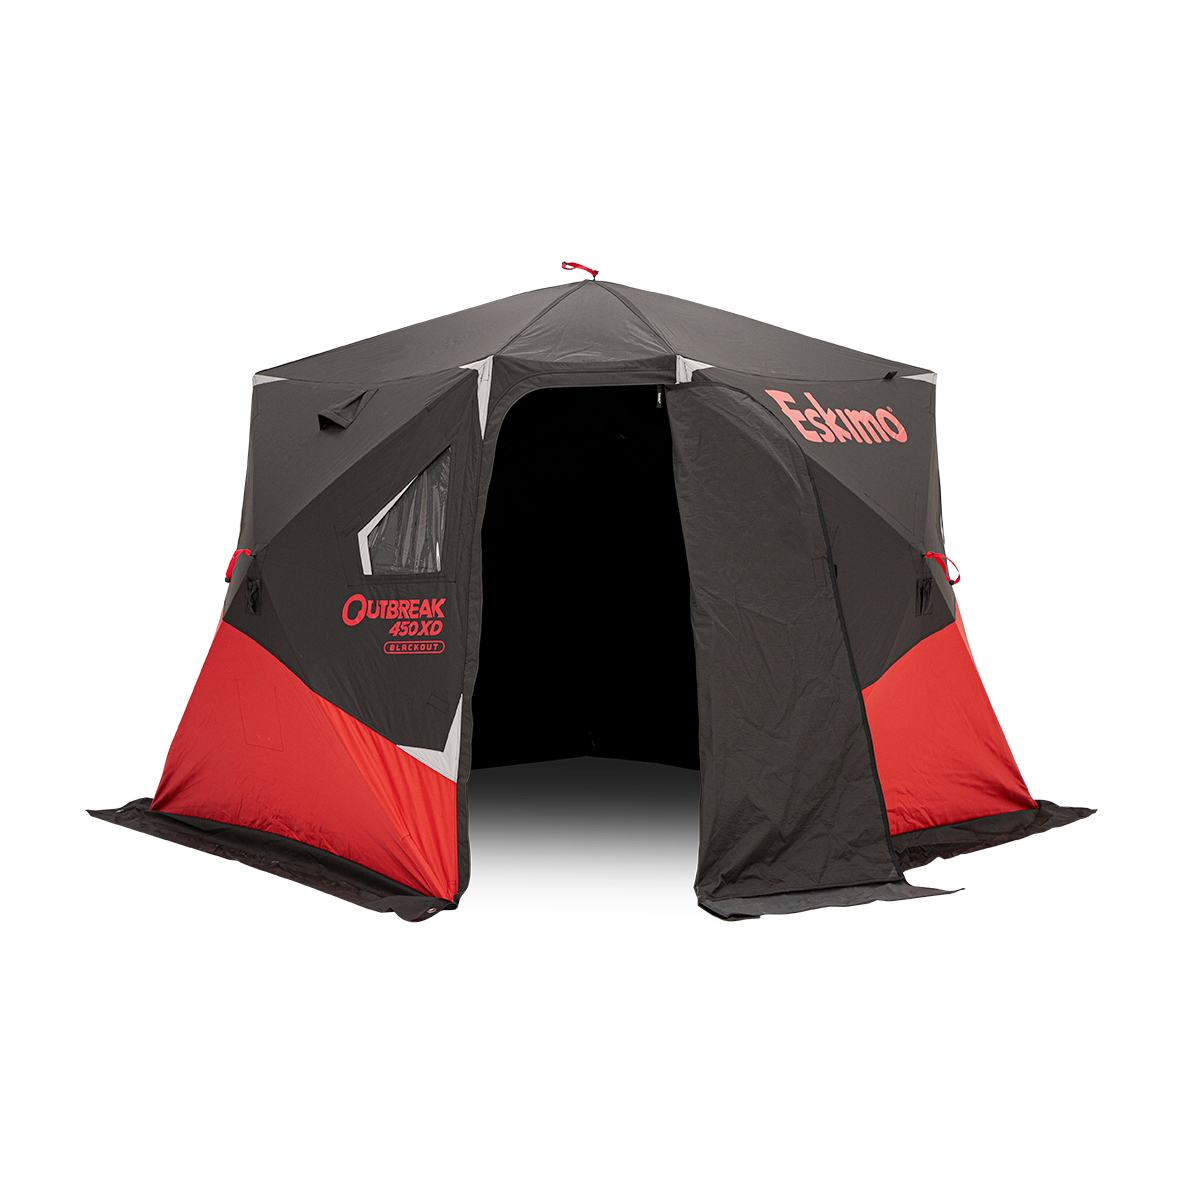 Eskimo Outbreak 250XD Insulated Pop-up Shelter